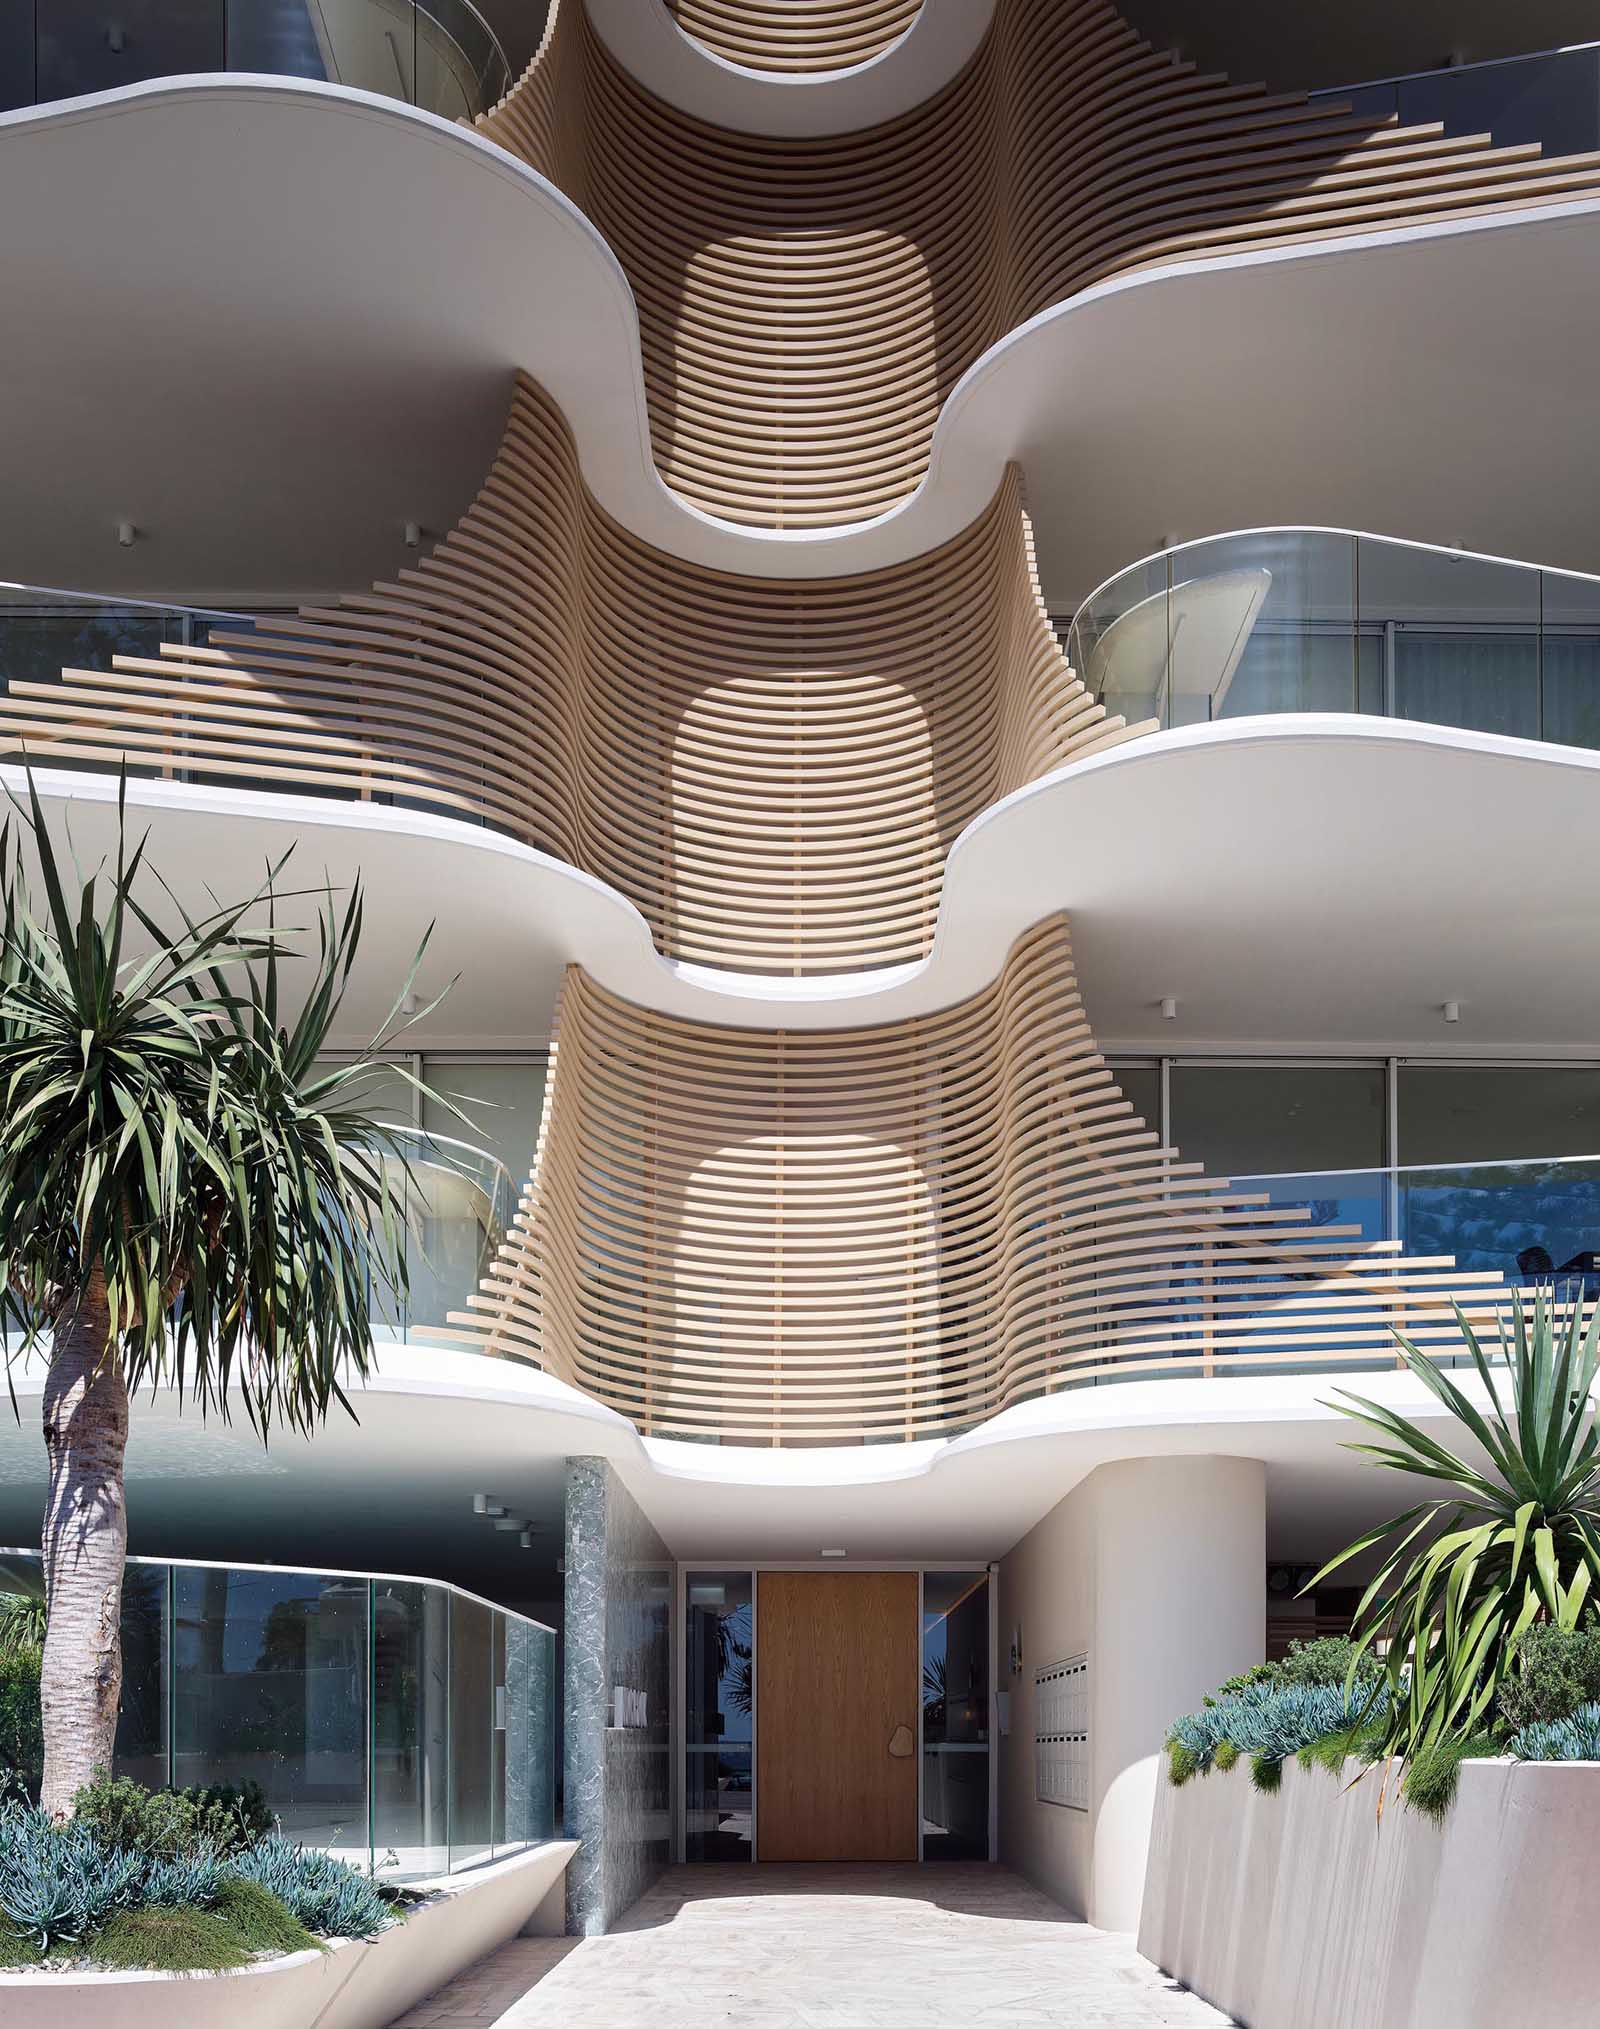 This sculptural and eye-catching building has organic, overlapping architectural curves that resemble the nearby heritage-listed Norfolk Pine Trees.